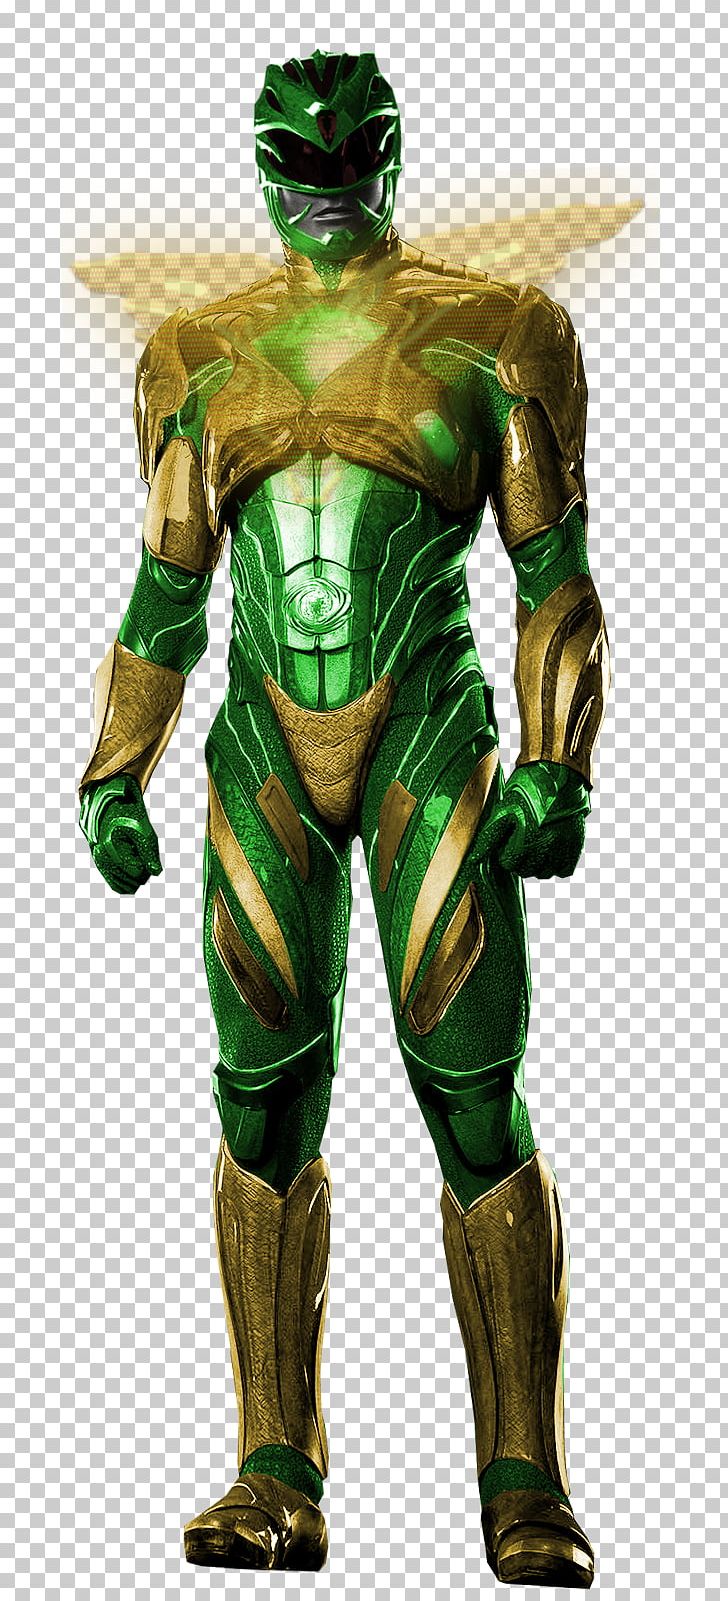 Tommy Oliver Red Ranger Billy Cranston Power Rangers: Legacy Wars Rita Repulsa PNG, Clipart, Action Figure, Costume, Fictional Character, Holographic, Jason David Frank Free PNG Download